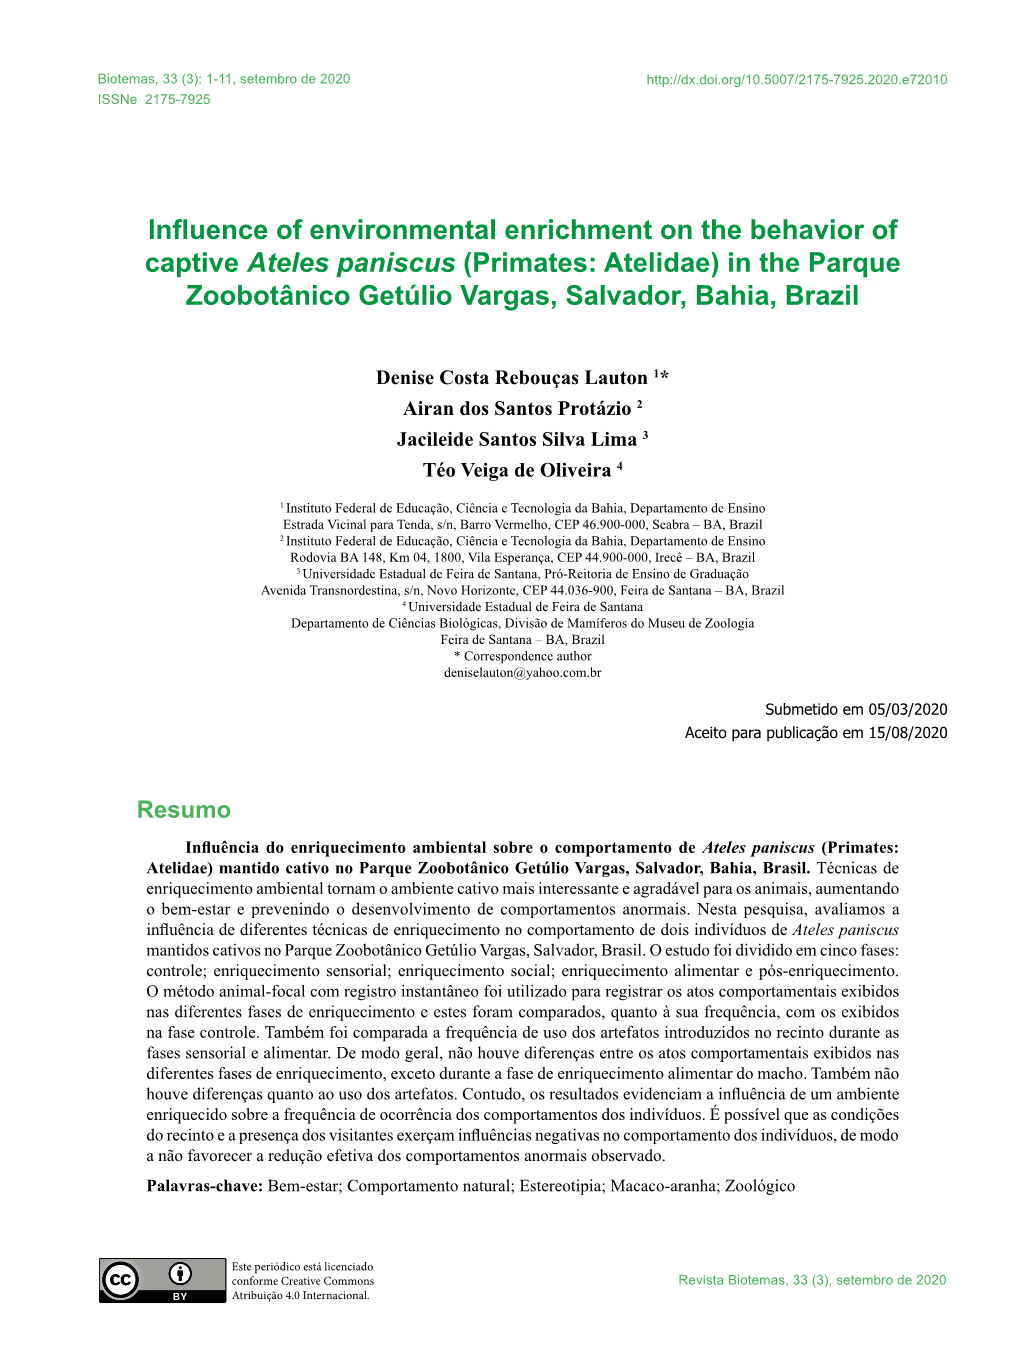 Influence of Environmental Enrichment on the Behavior of Captive